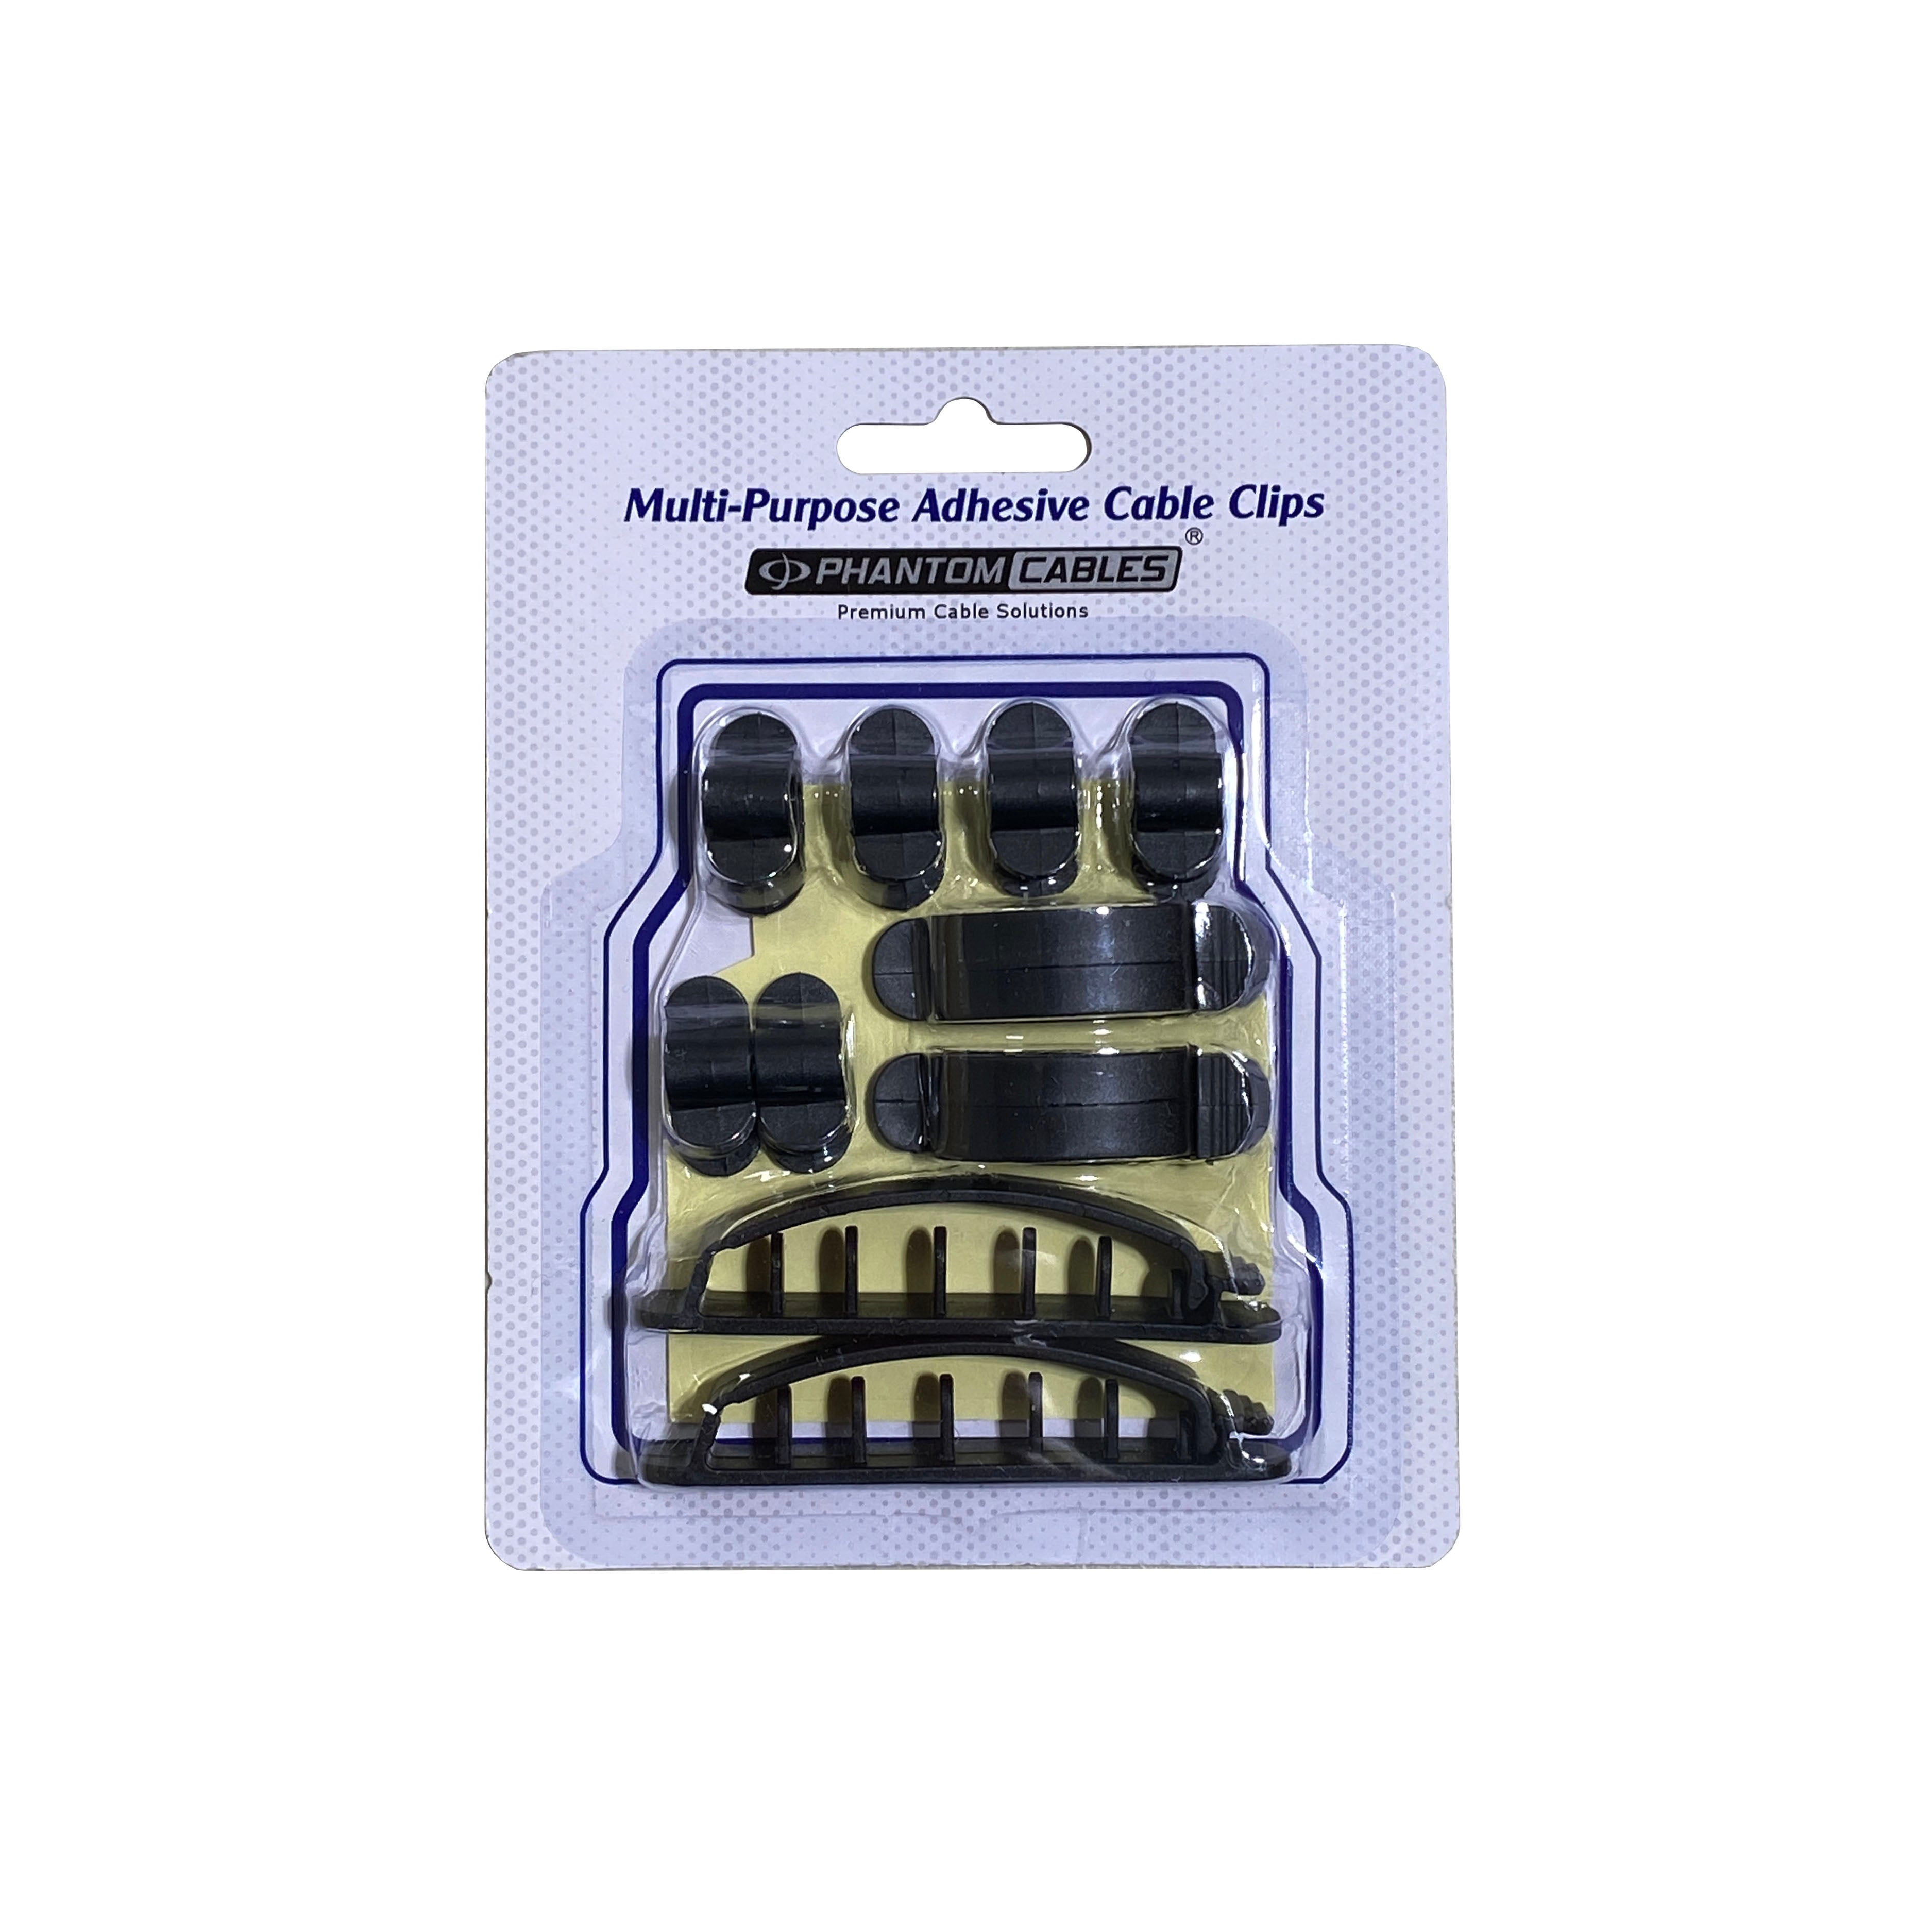 Adhesive Cable Clip Mounts